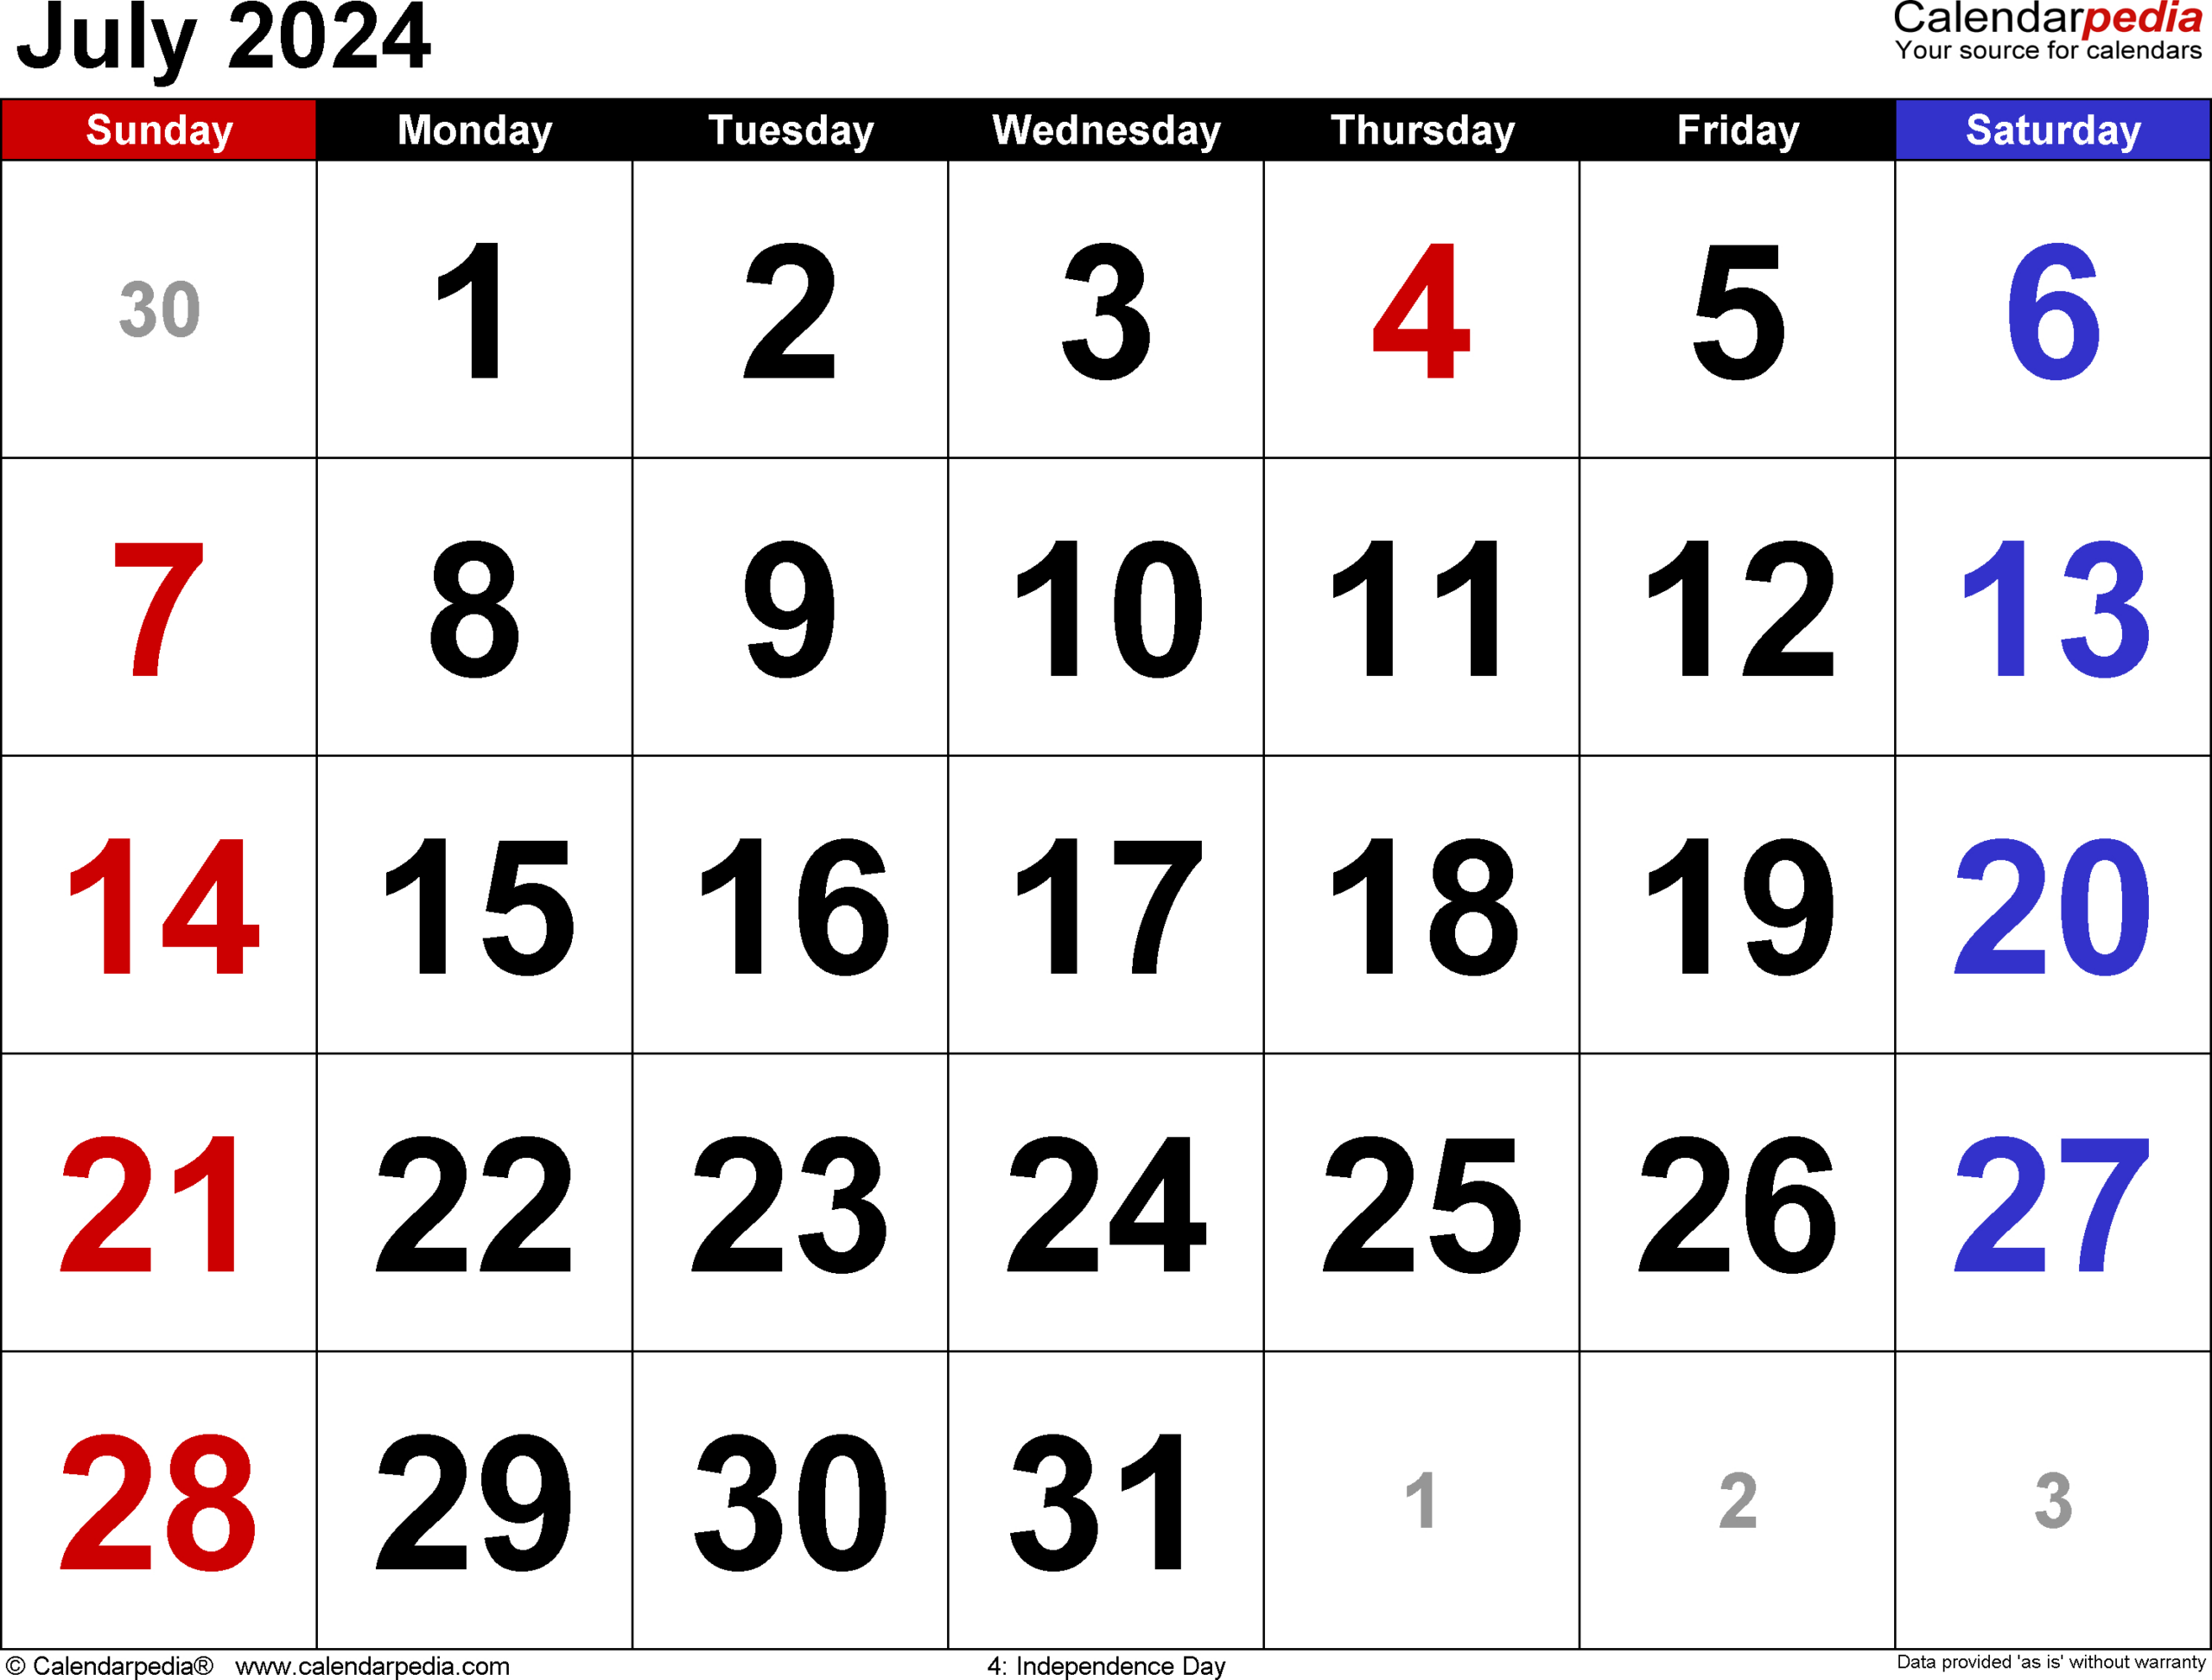 July 2024 Calendar | Templates For Word, Excel And Pdf intended for July 2024 Printable Calendar Word